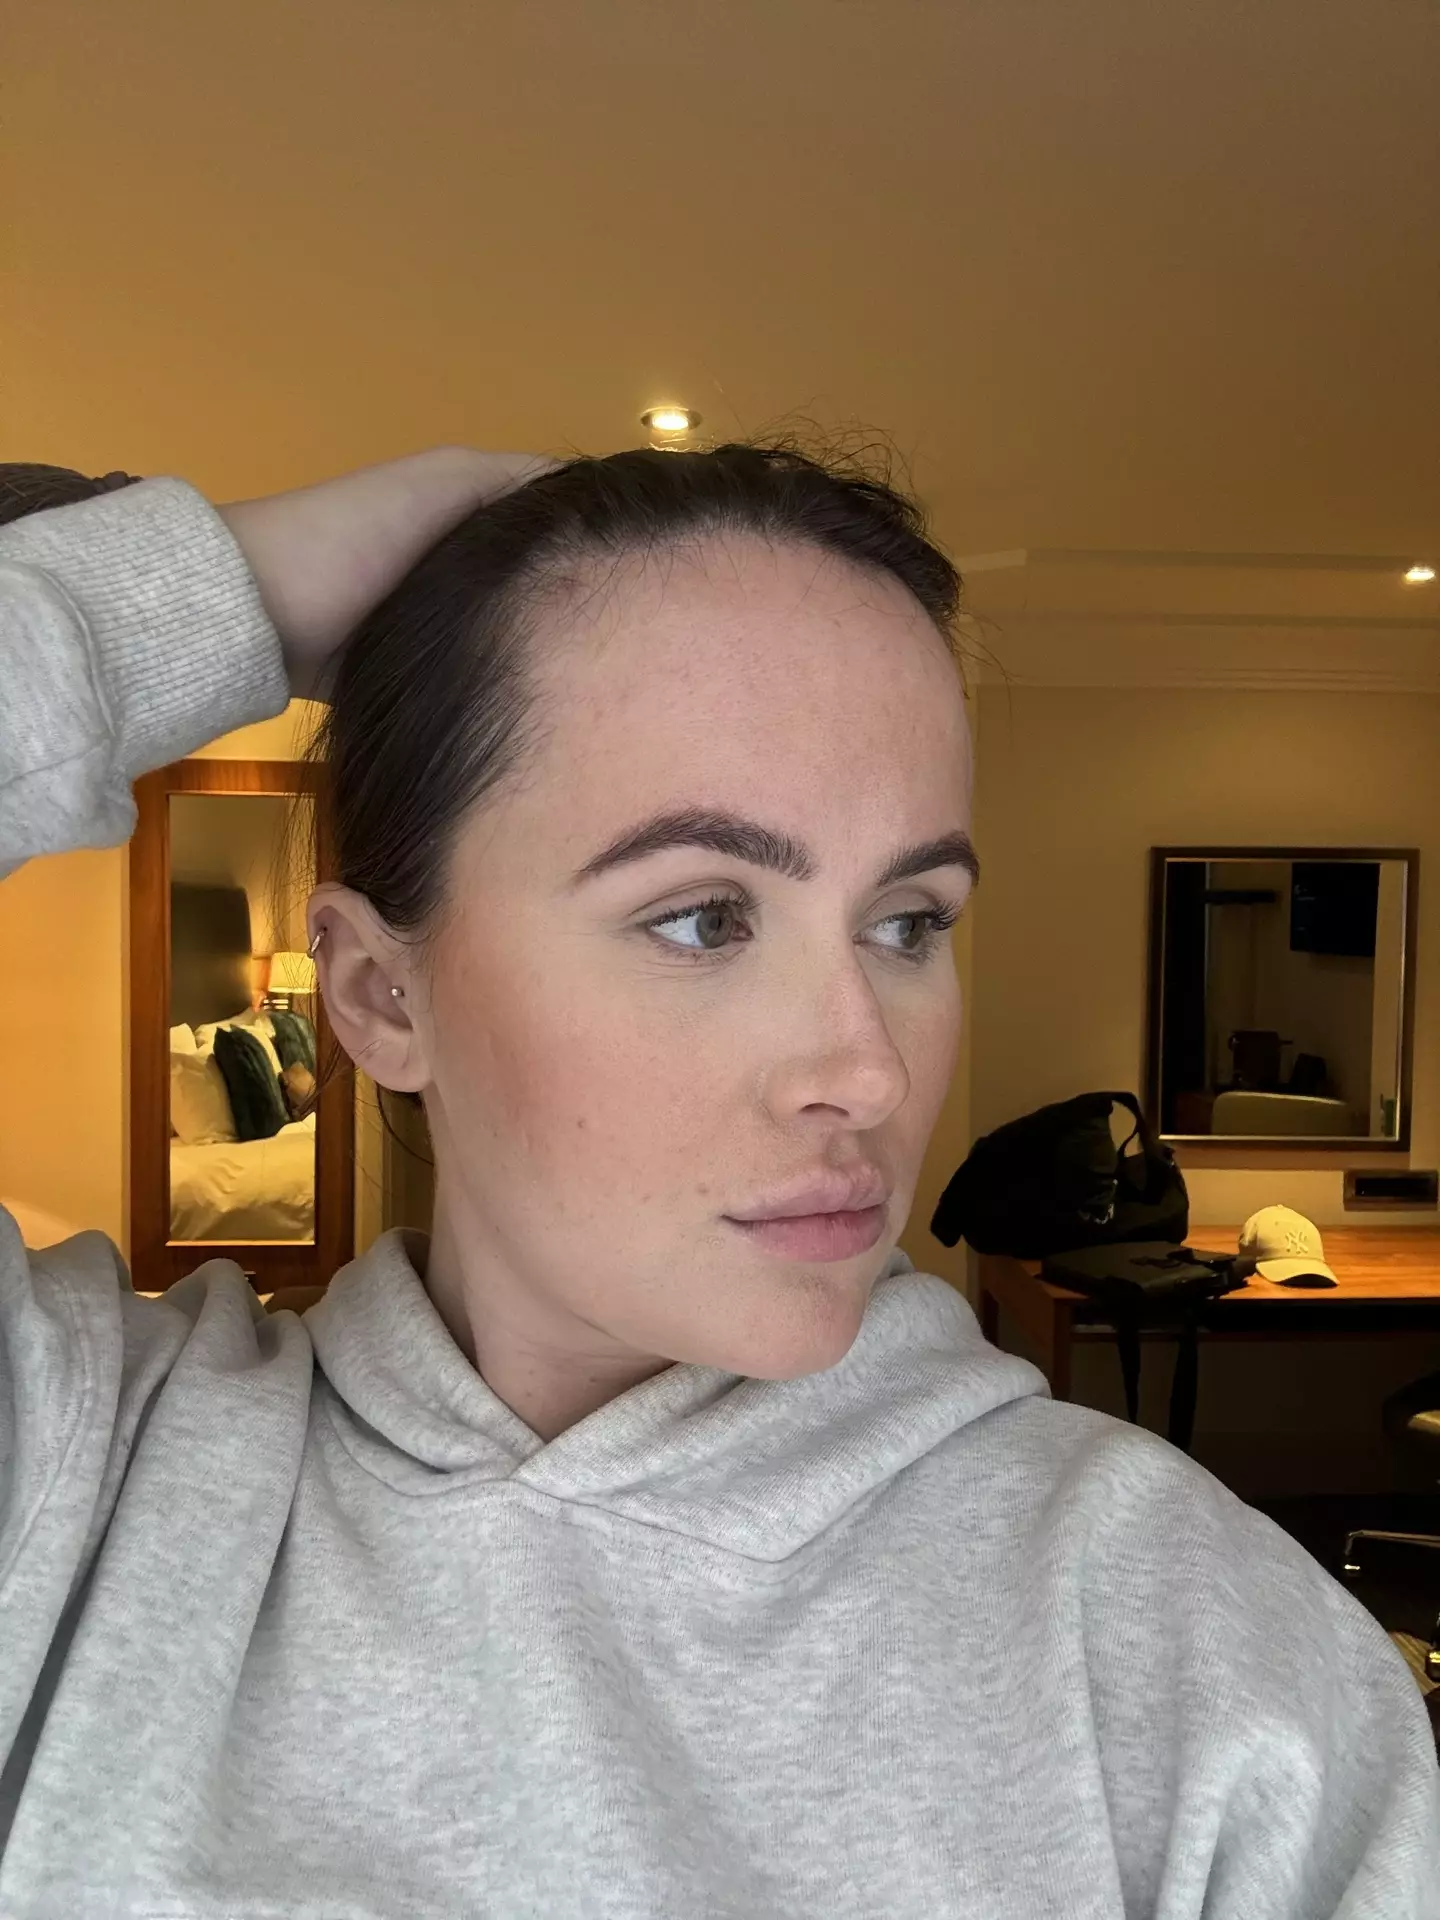 The 27-year-old opened up about being bullied for her 'fivehead' in school.